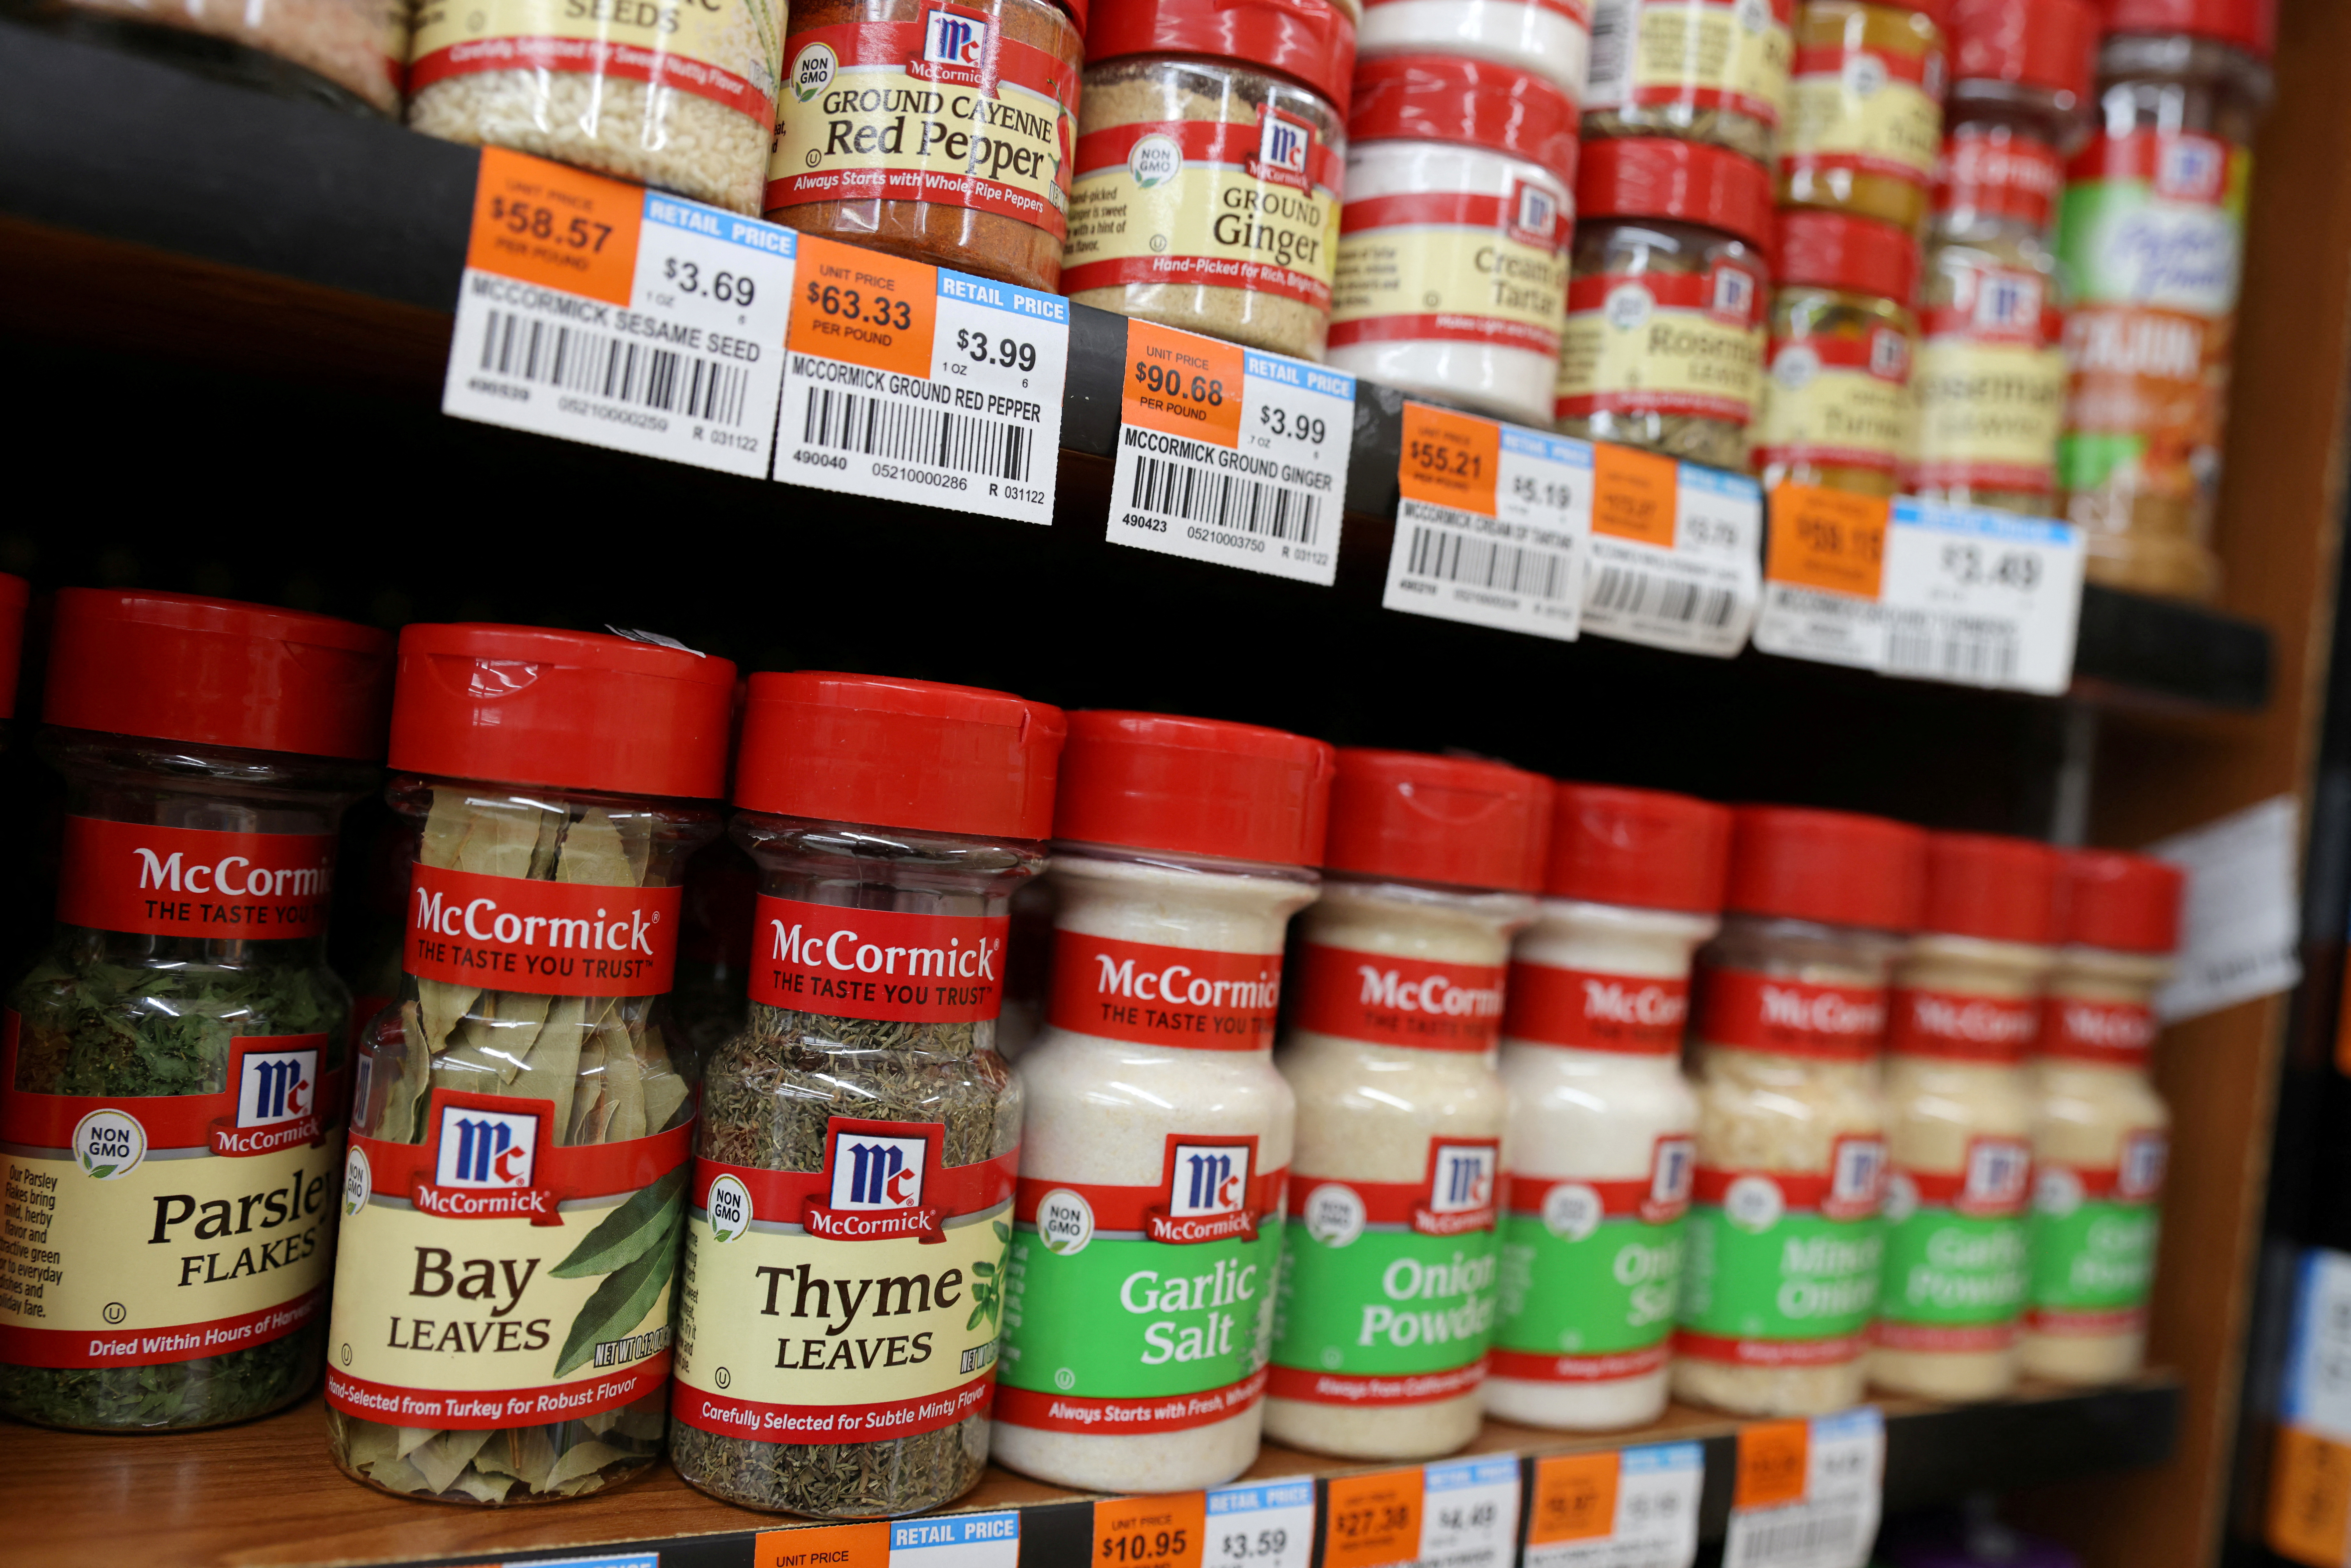 McCormick & Company spices are seen on display in a store in Manhattan, New York City